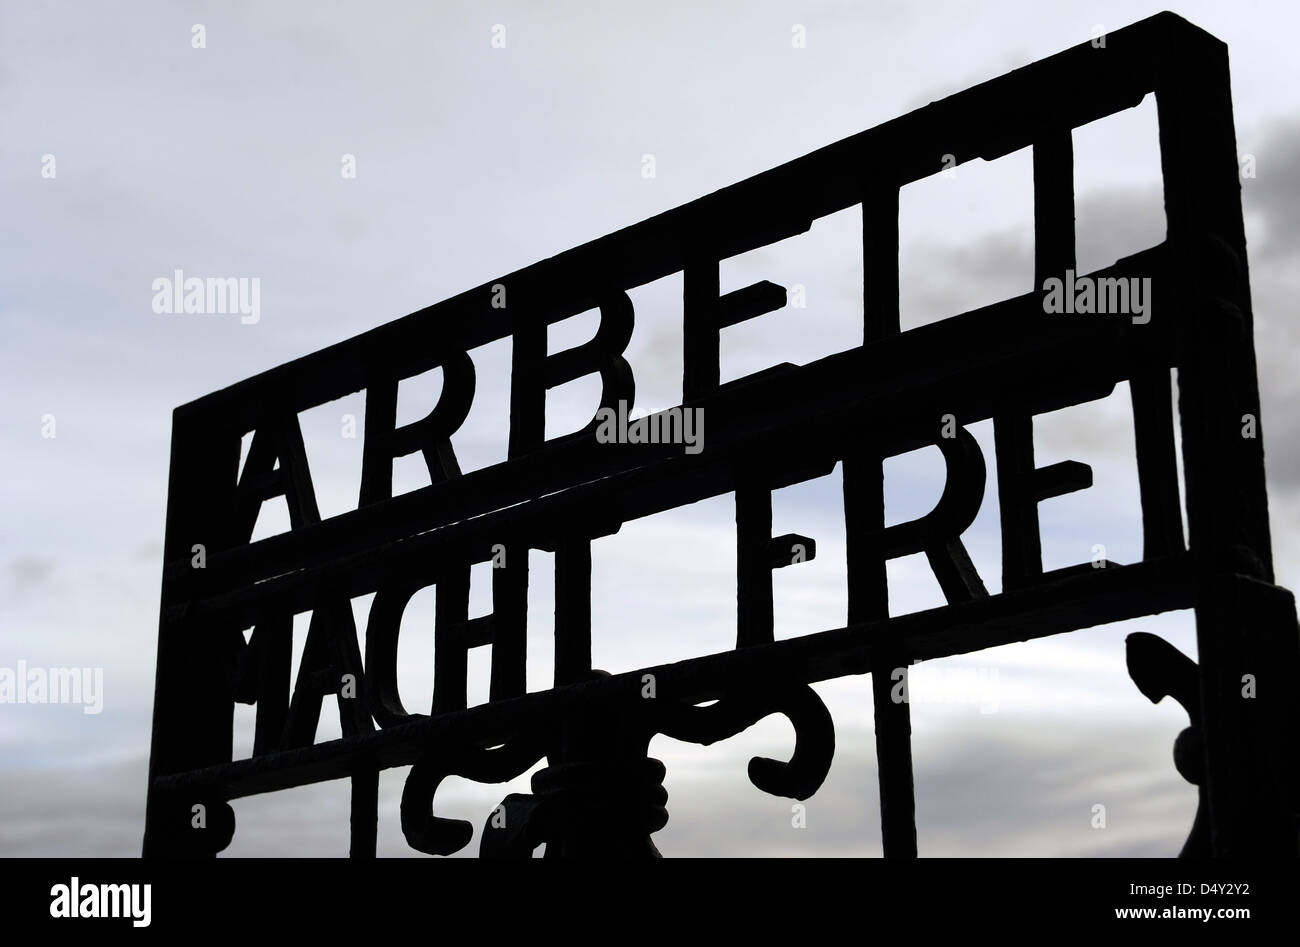 Dachau Concentration Camp. Nazi camp of prisoners opened in 1933. Slogan Arbeit macht frei (Labour makes free). Main door. Stock Photo